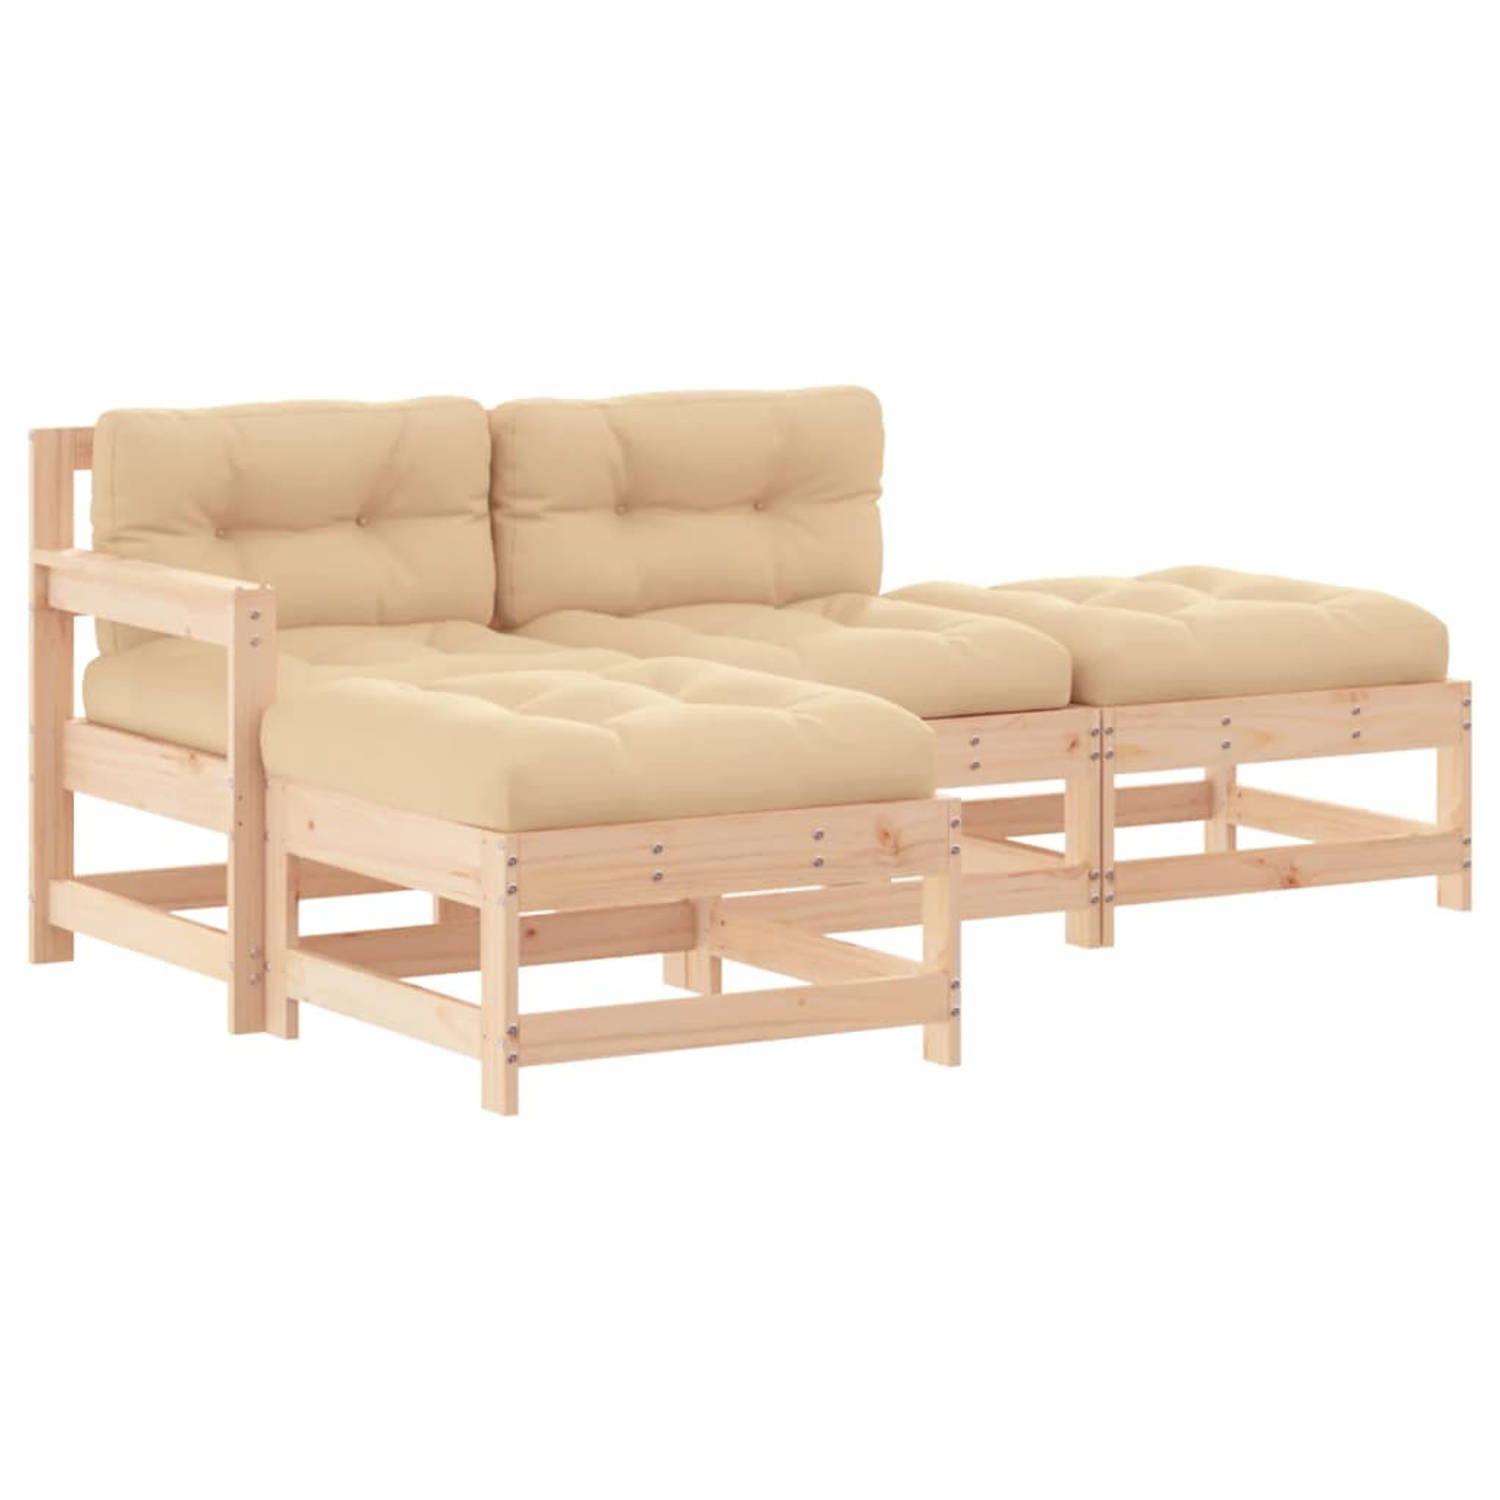 The Living Store Loungeset Tuin - Hout - Grenenhout - Modulair - 110 kg draagvermogen - Beige kussens - 5-delig